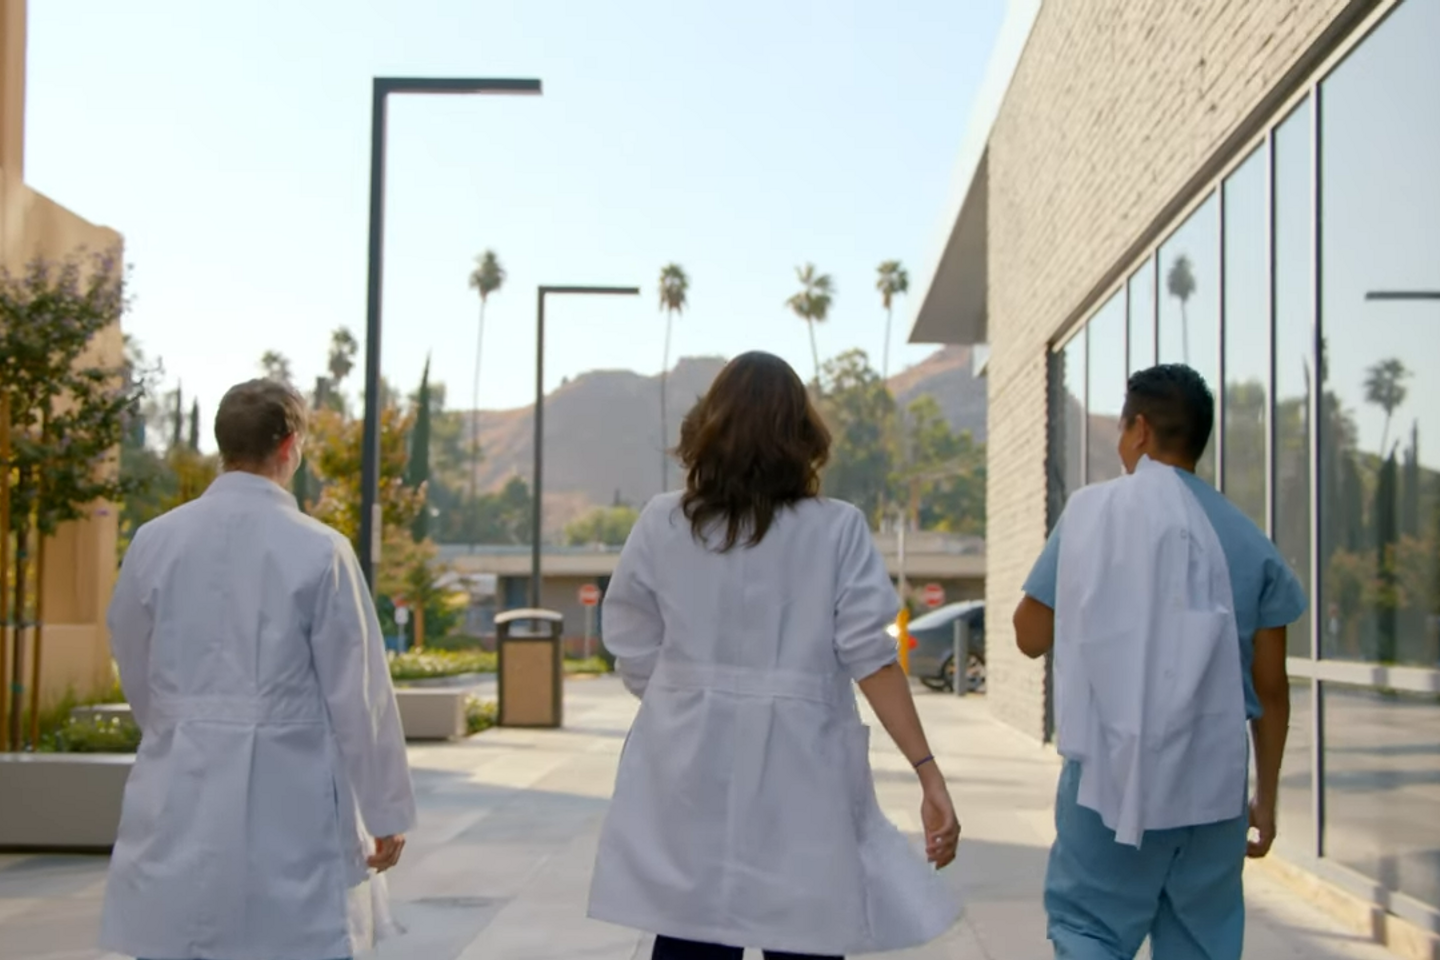 Three graduate medical students walk together in a breezeway between two buildings.